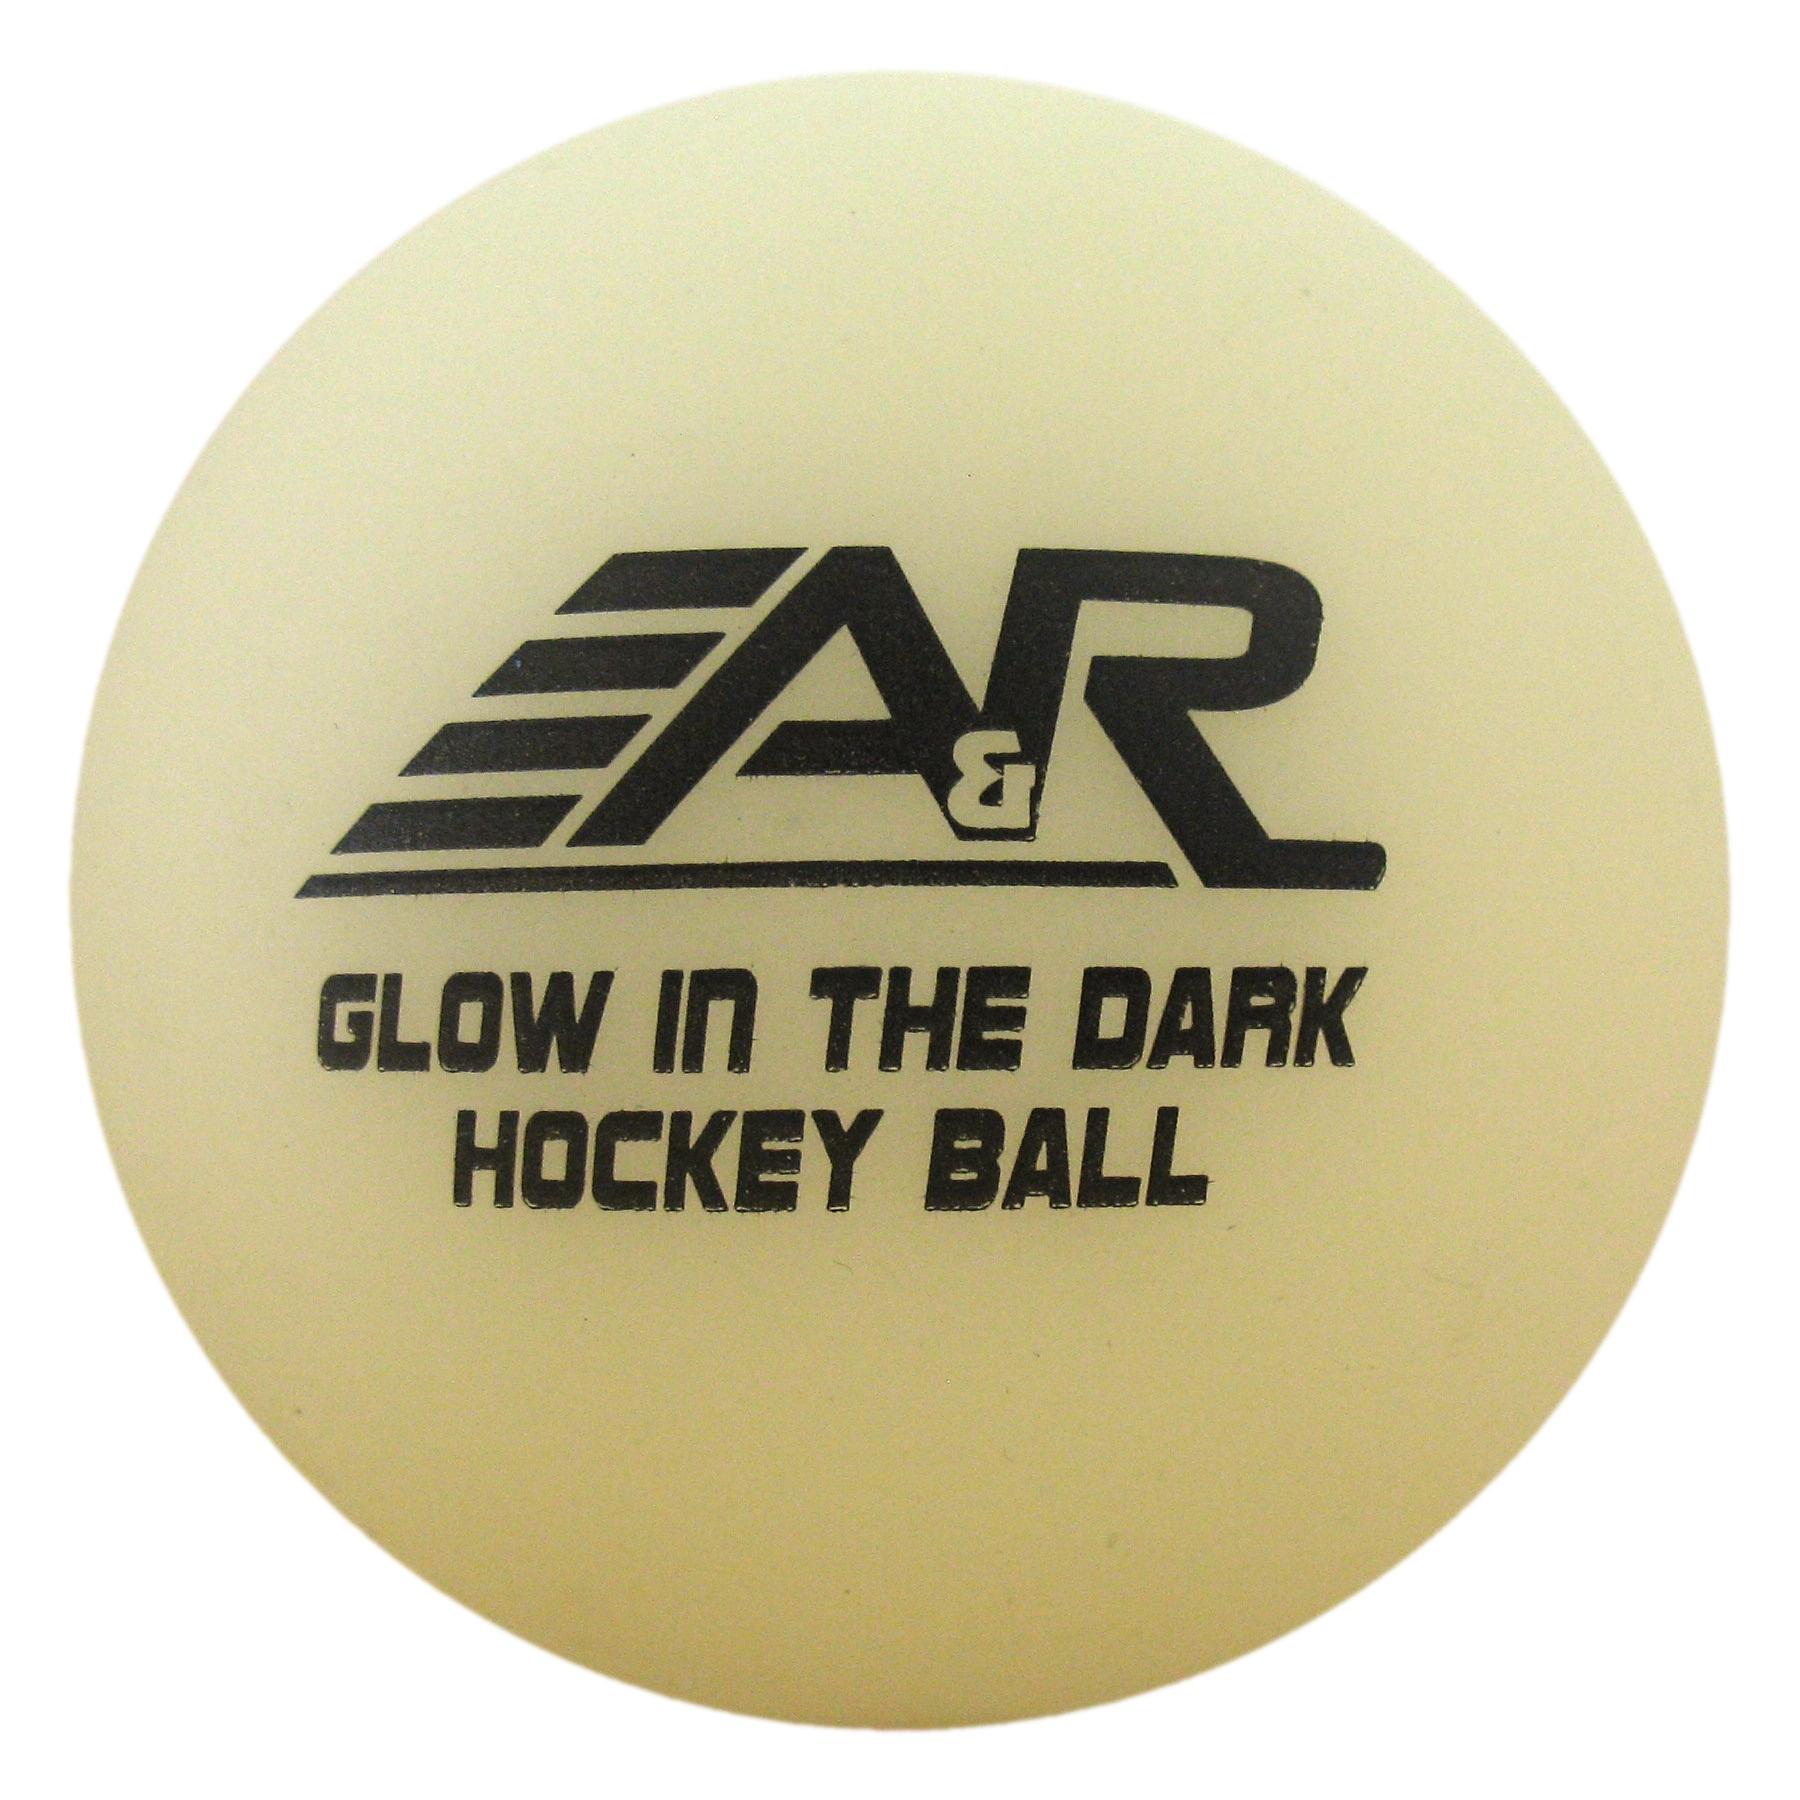 A&R Glow in the Dark Street Hockey Ballproduct zoom image #1